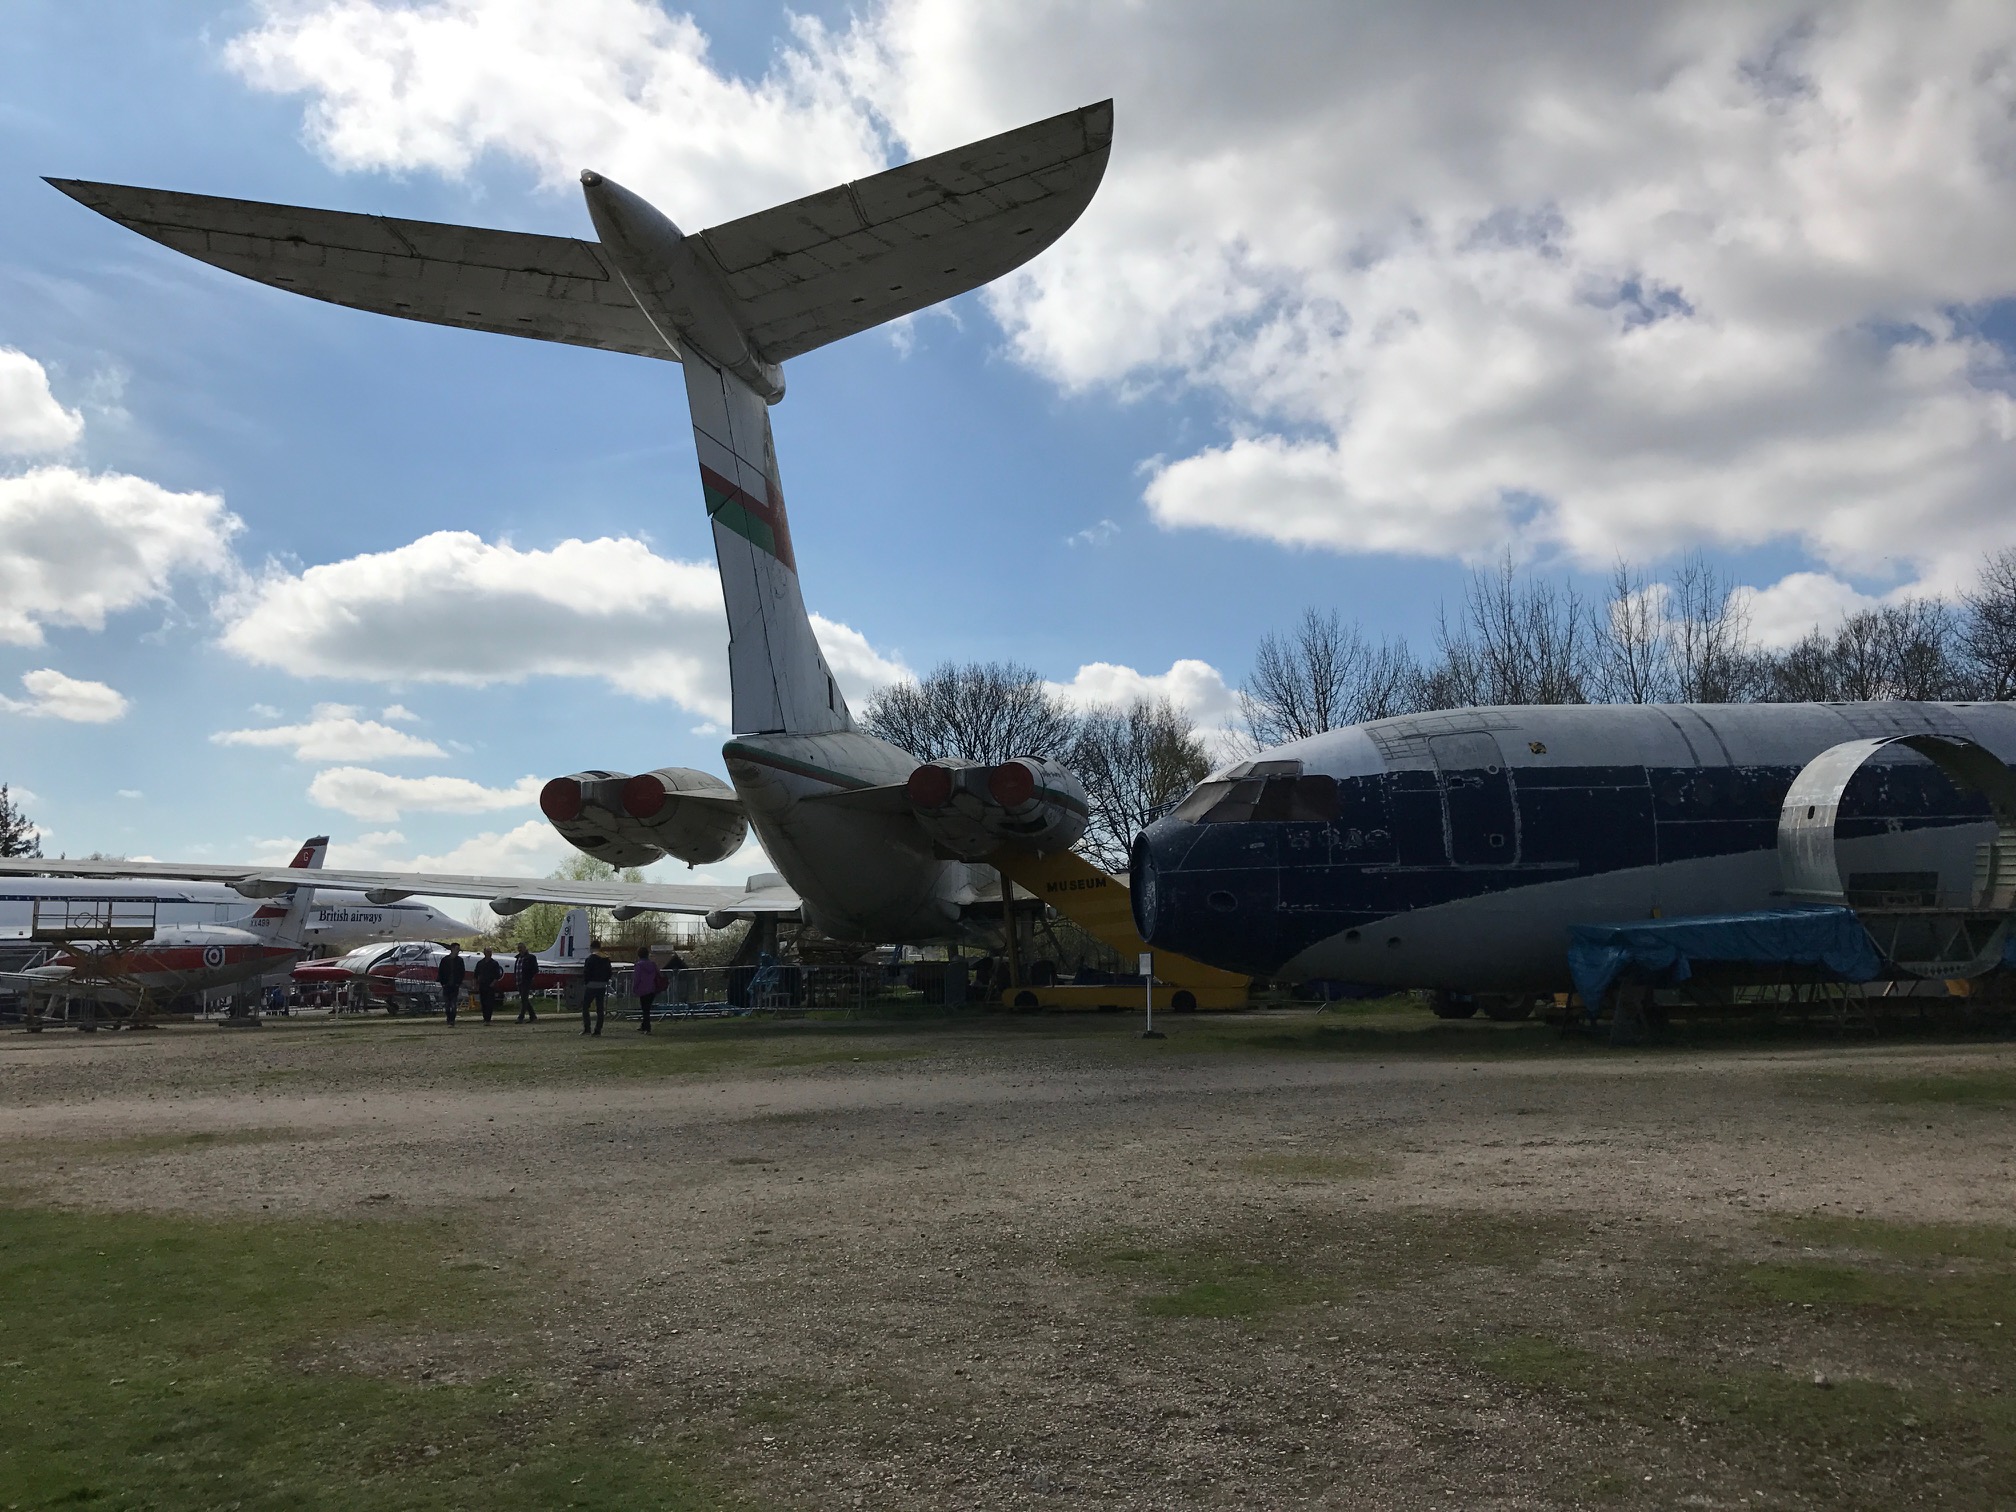 Brooklands: One and a bit VC10s.